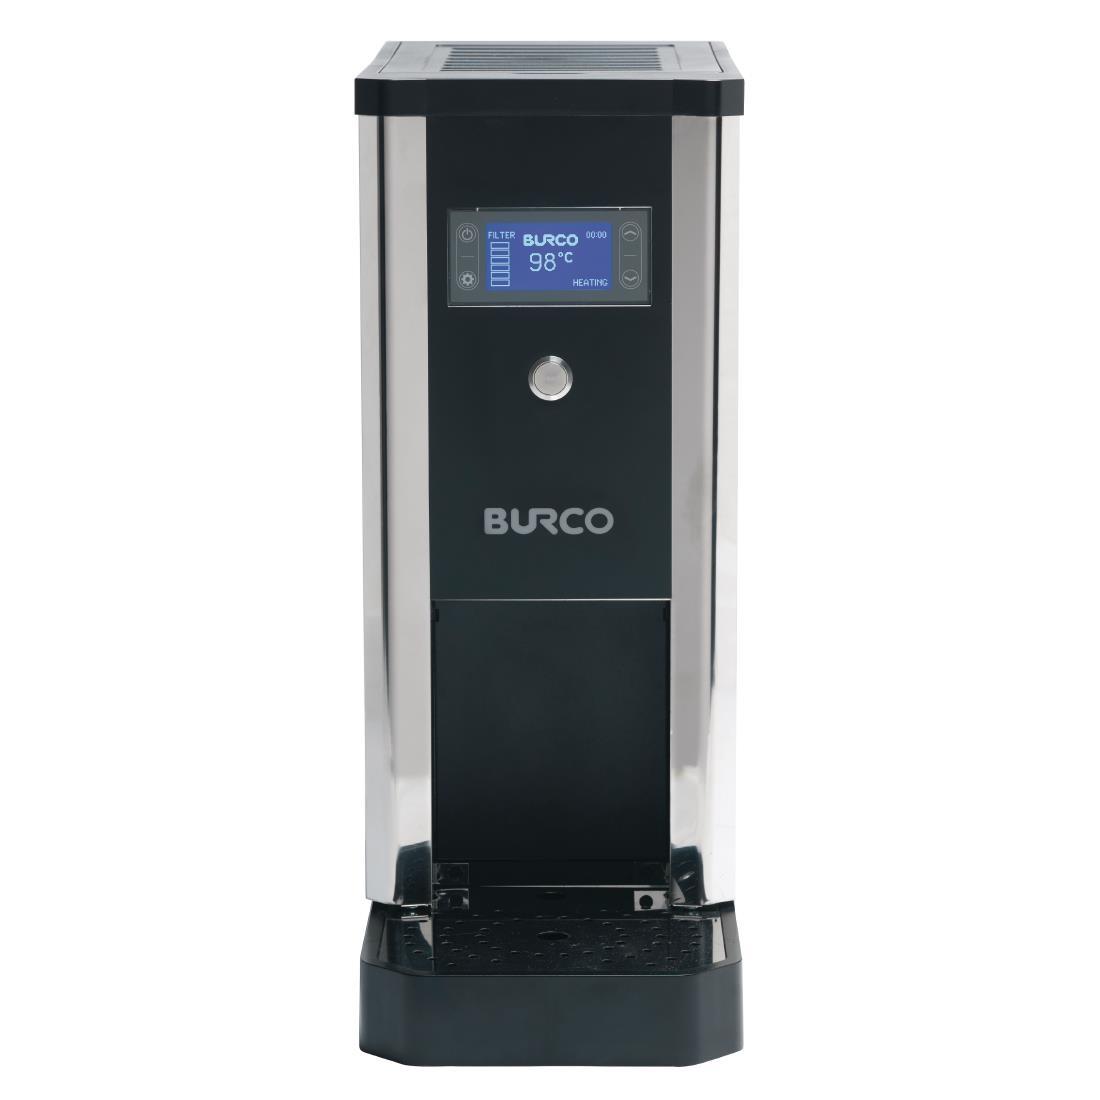 Burco Slimline 5Ltr Auto Fill Water Boiler with Filtration 70043 - DY436  - 3